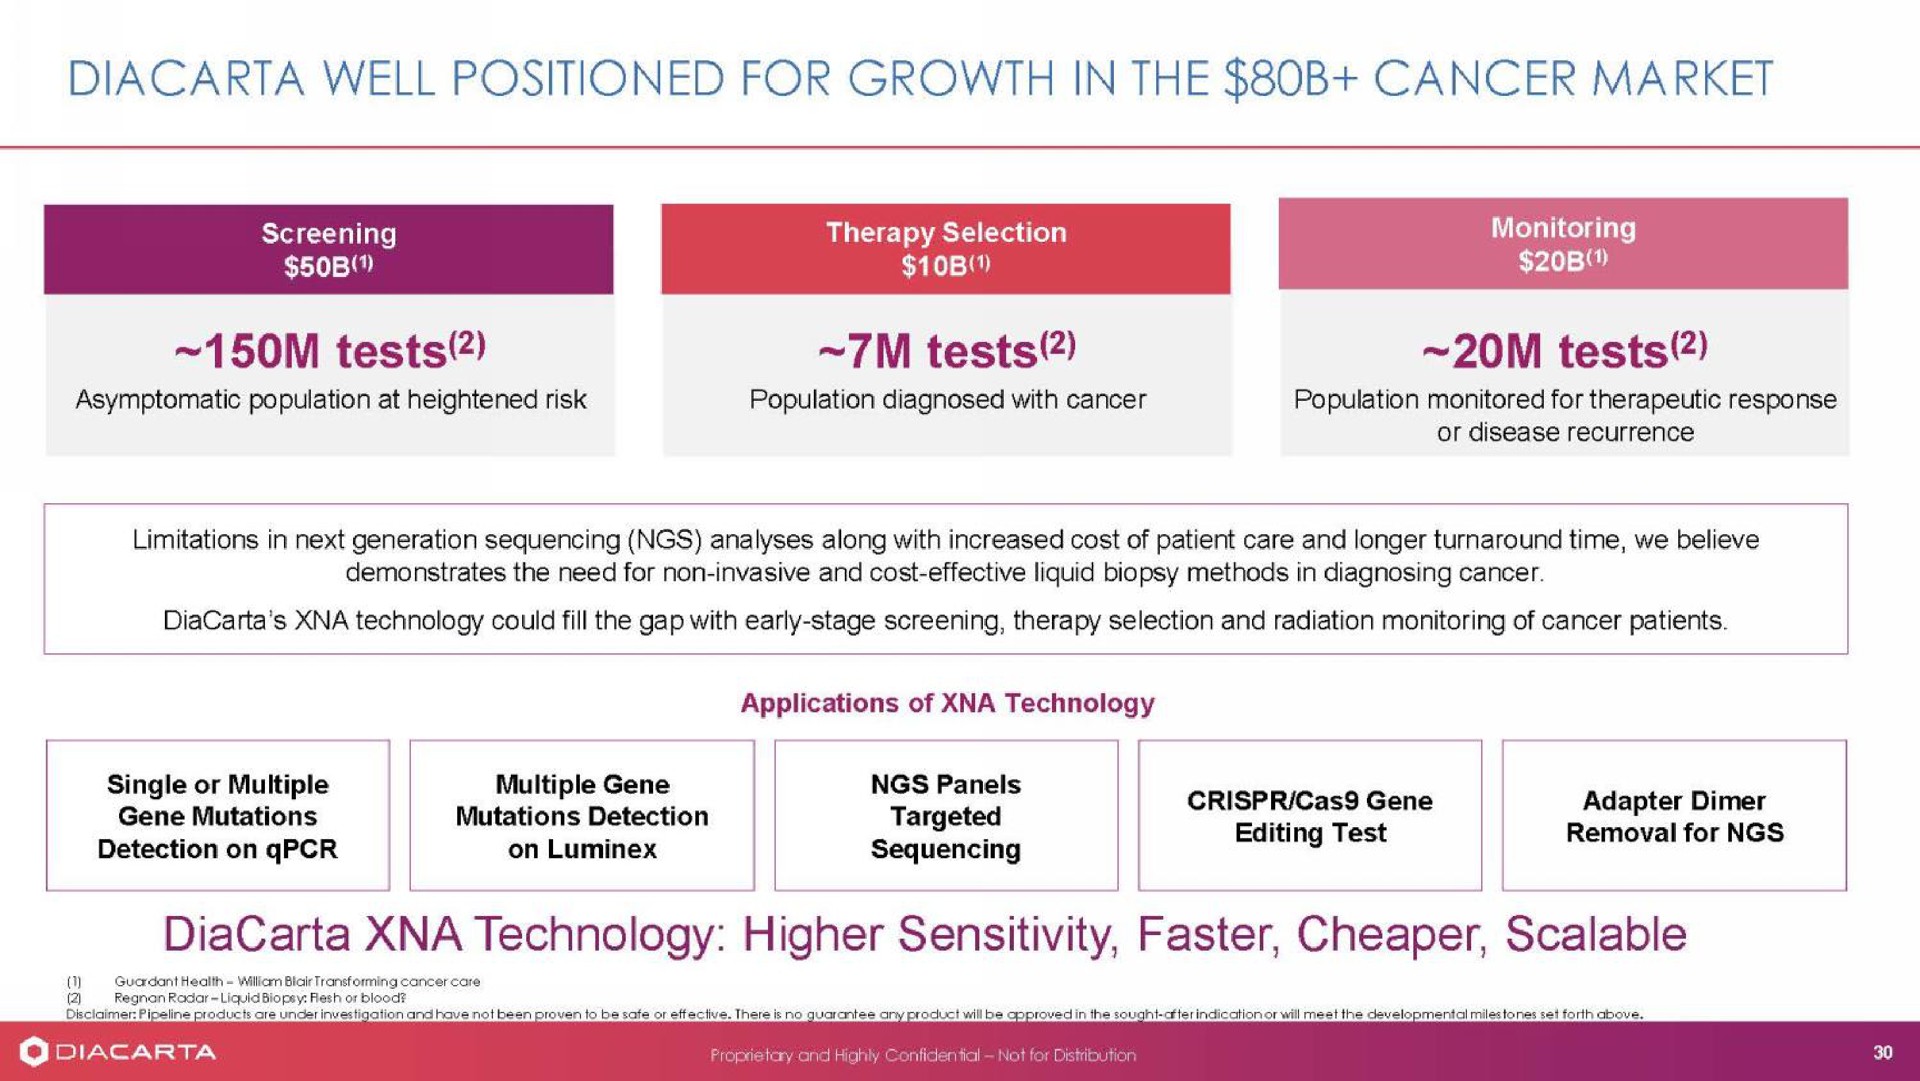 well positioned for growth in the cancer market tests tests tests technology higher sensitivity faster scalable | DiaCarta